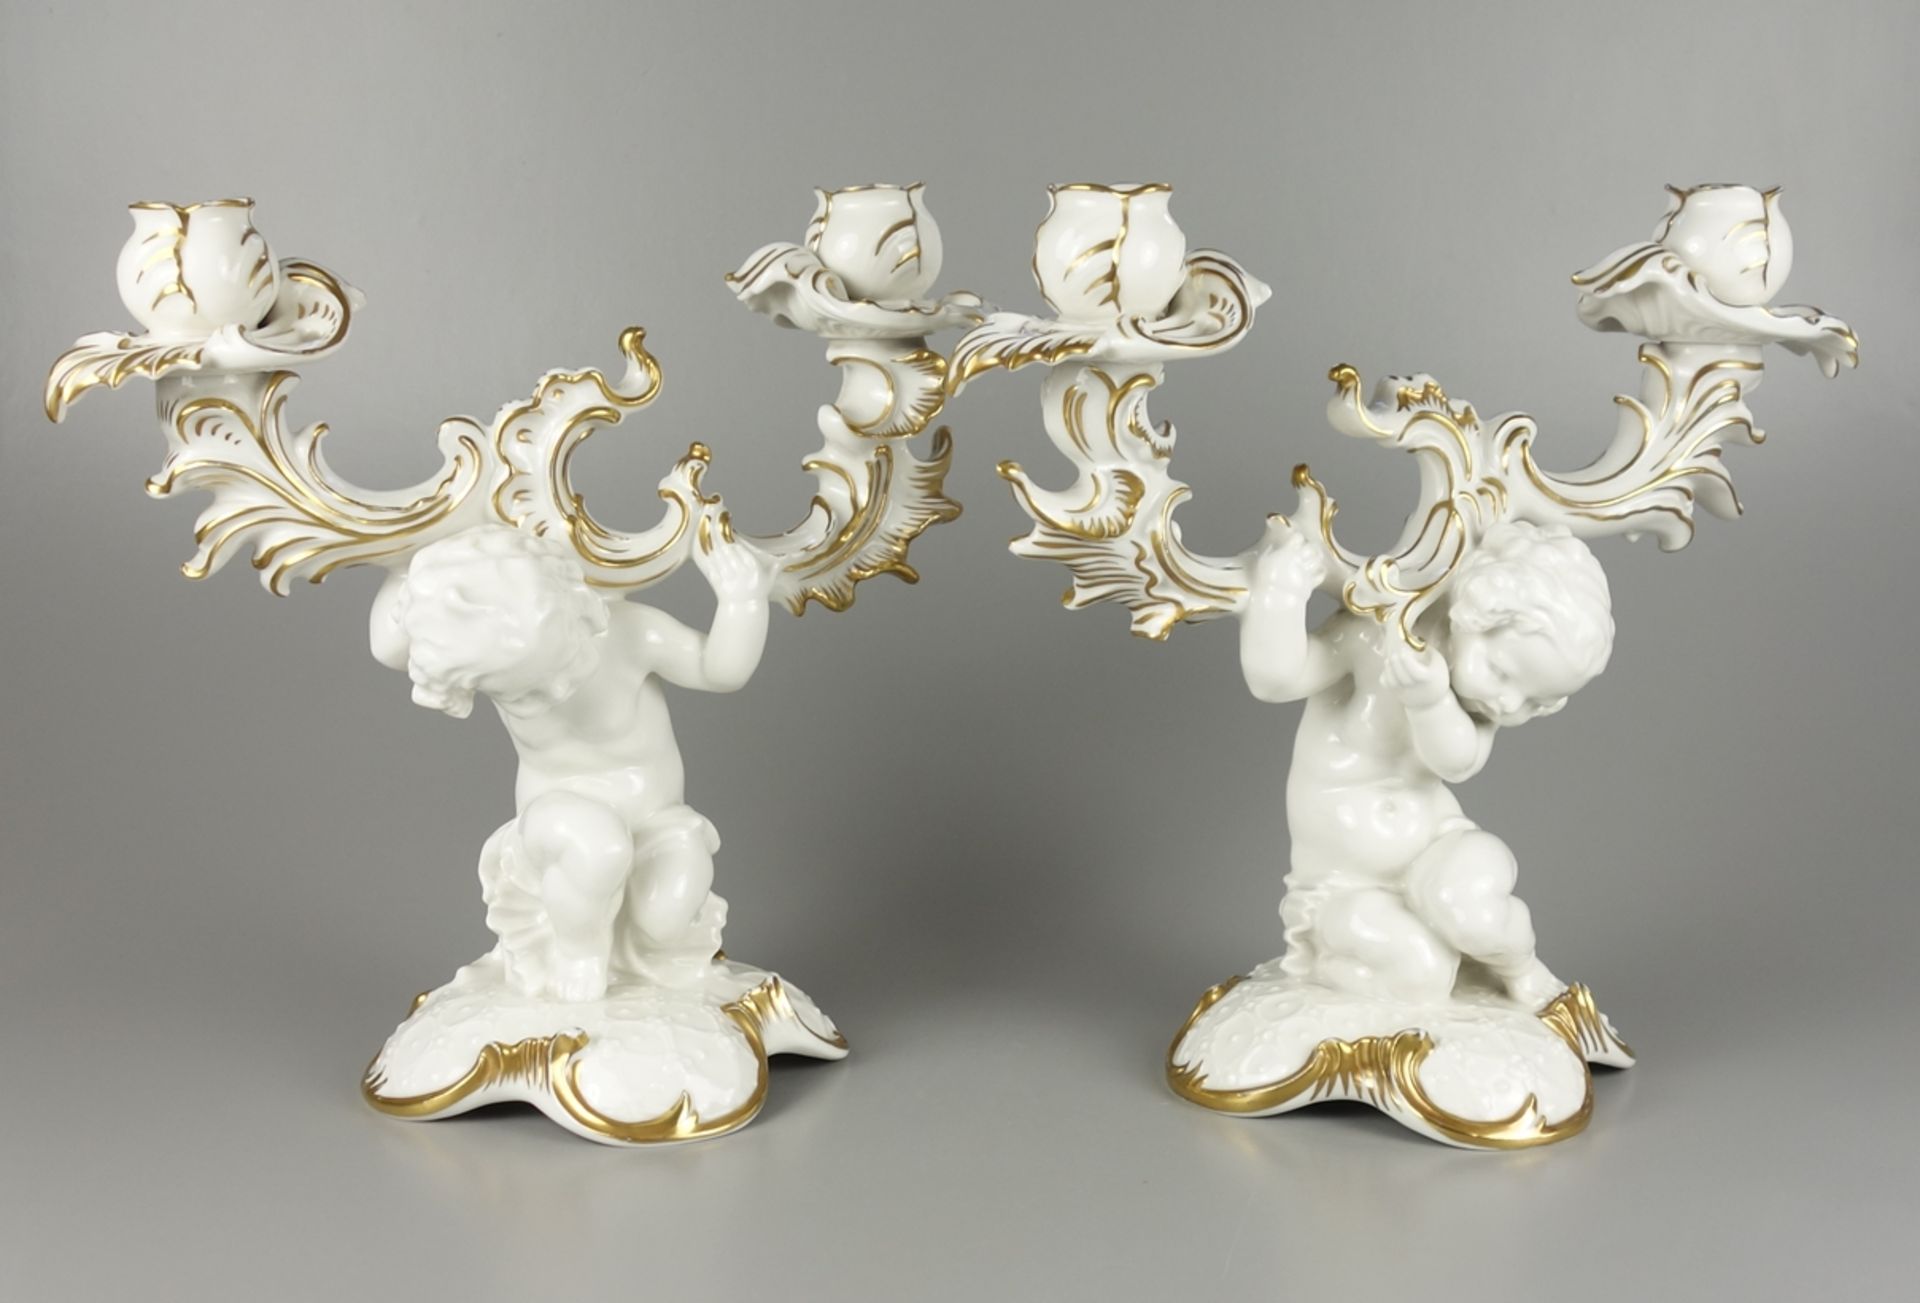 Pair of large figural candlesticks, Karl Tutter for Hutschenreuther, 1930s